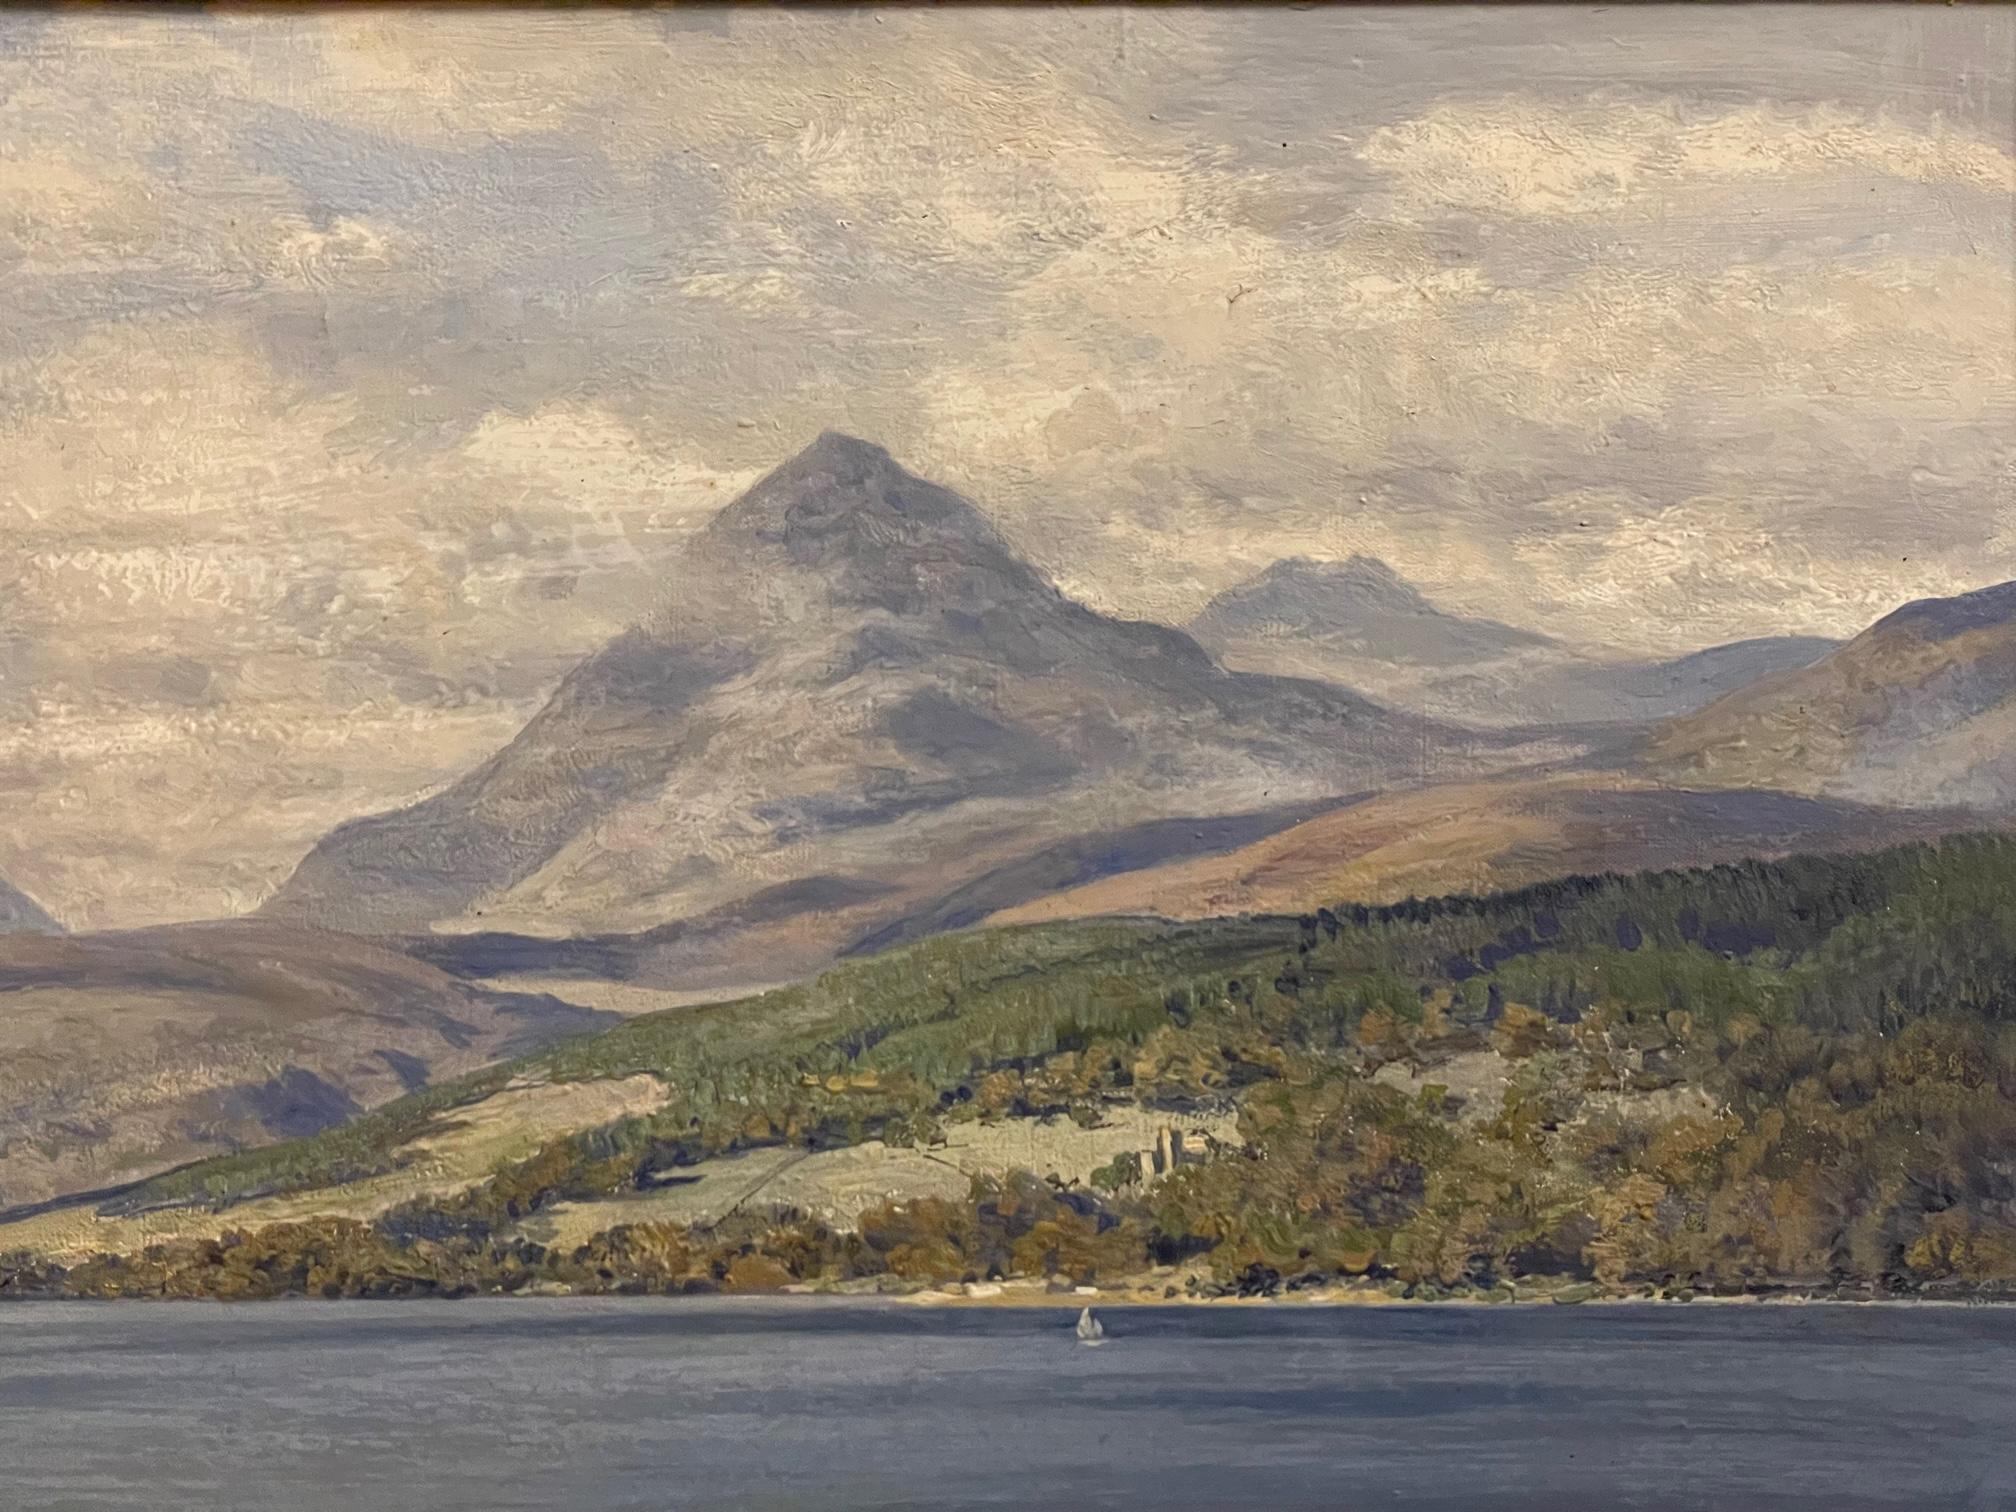 Isle of Arran, Brodick and Goatfell - Brown Landscape Painting by George Melvin Rennie